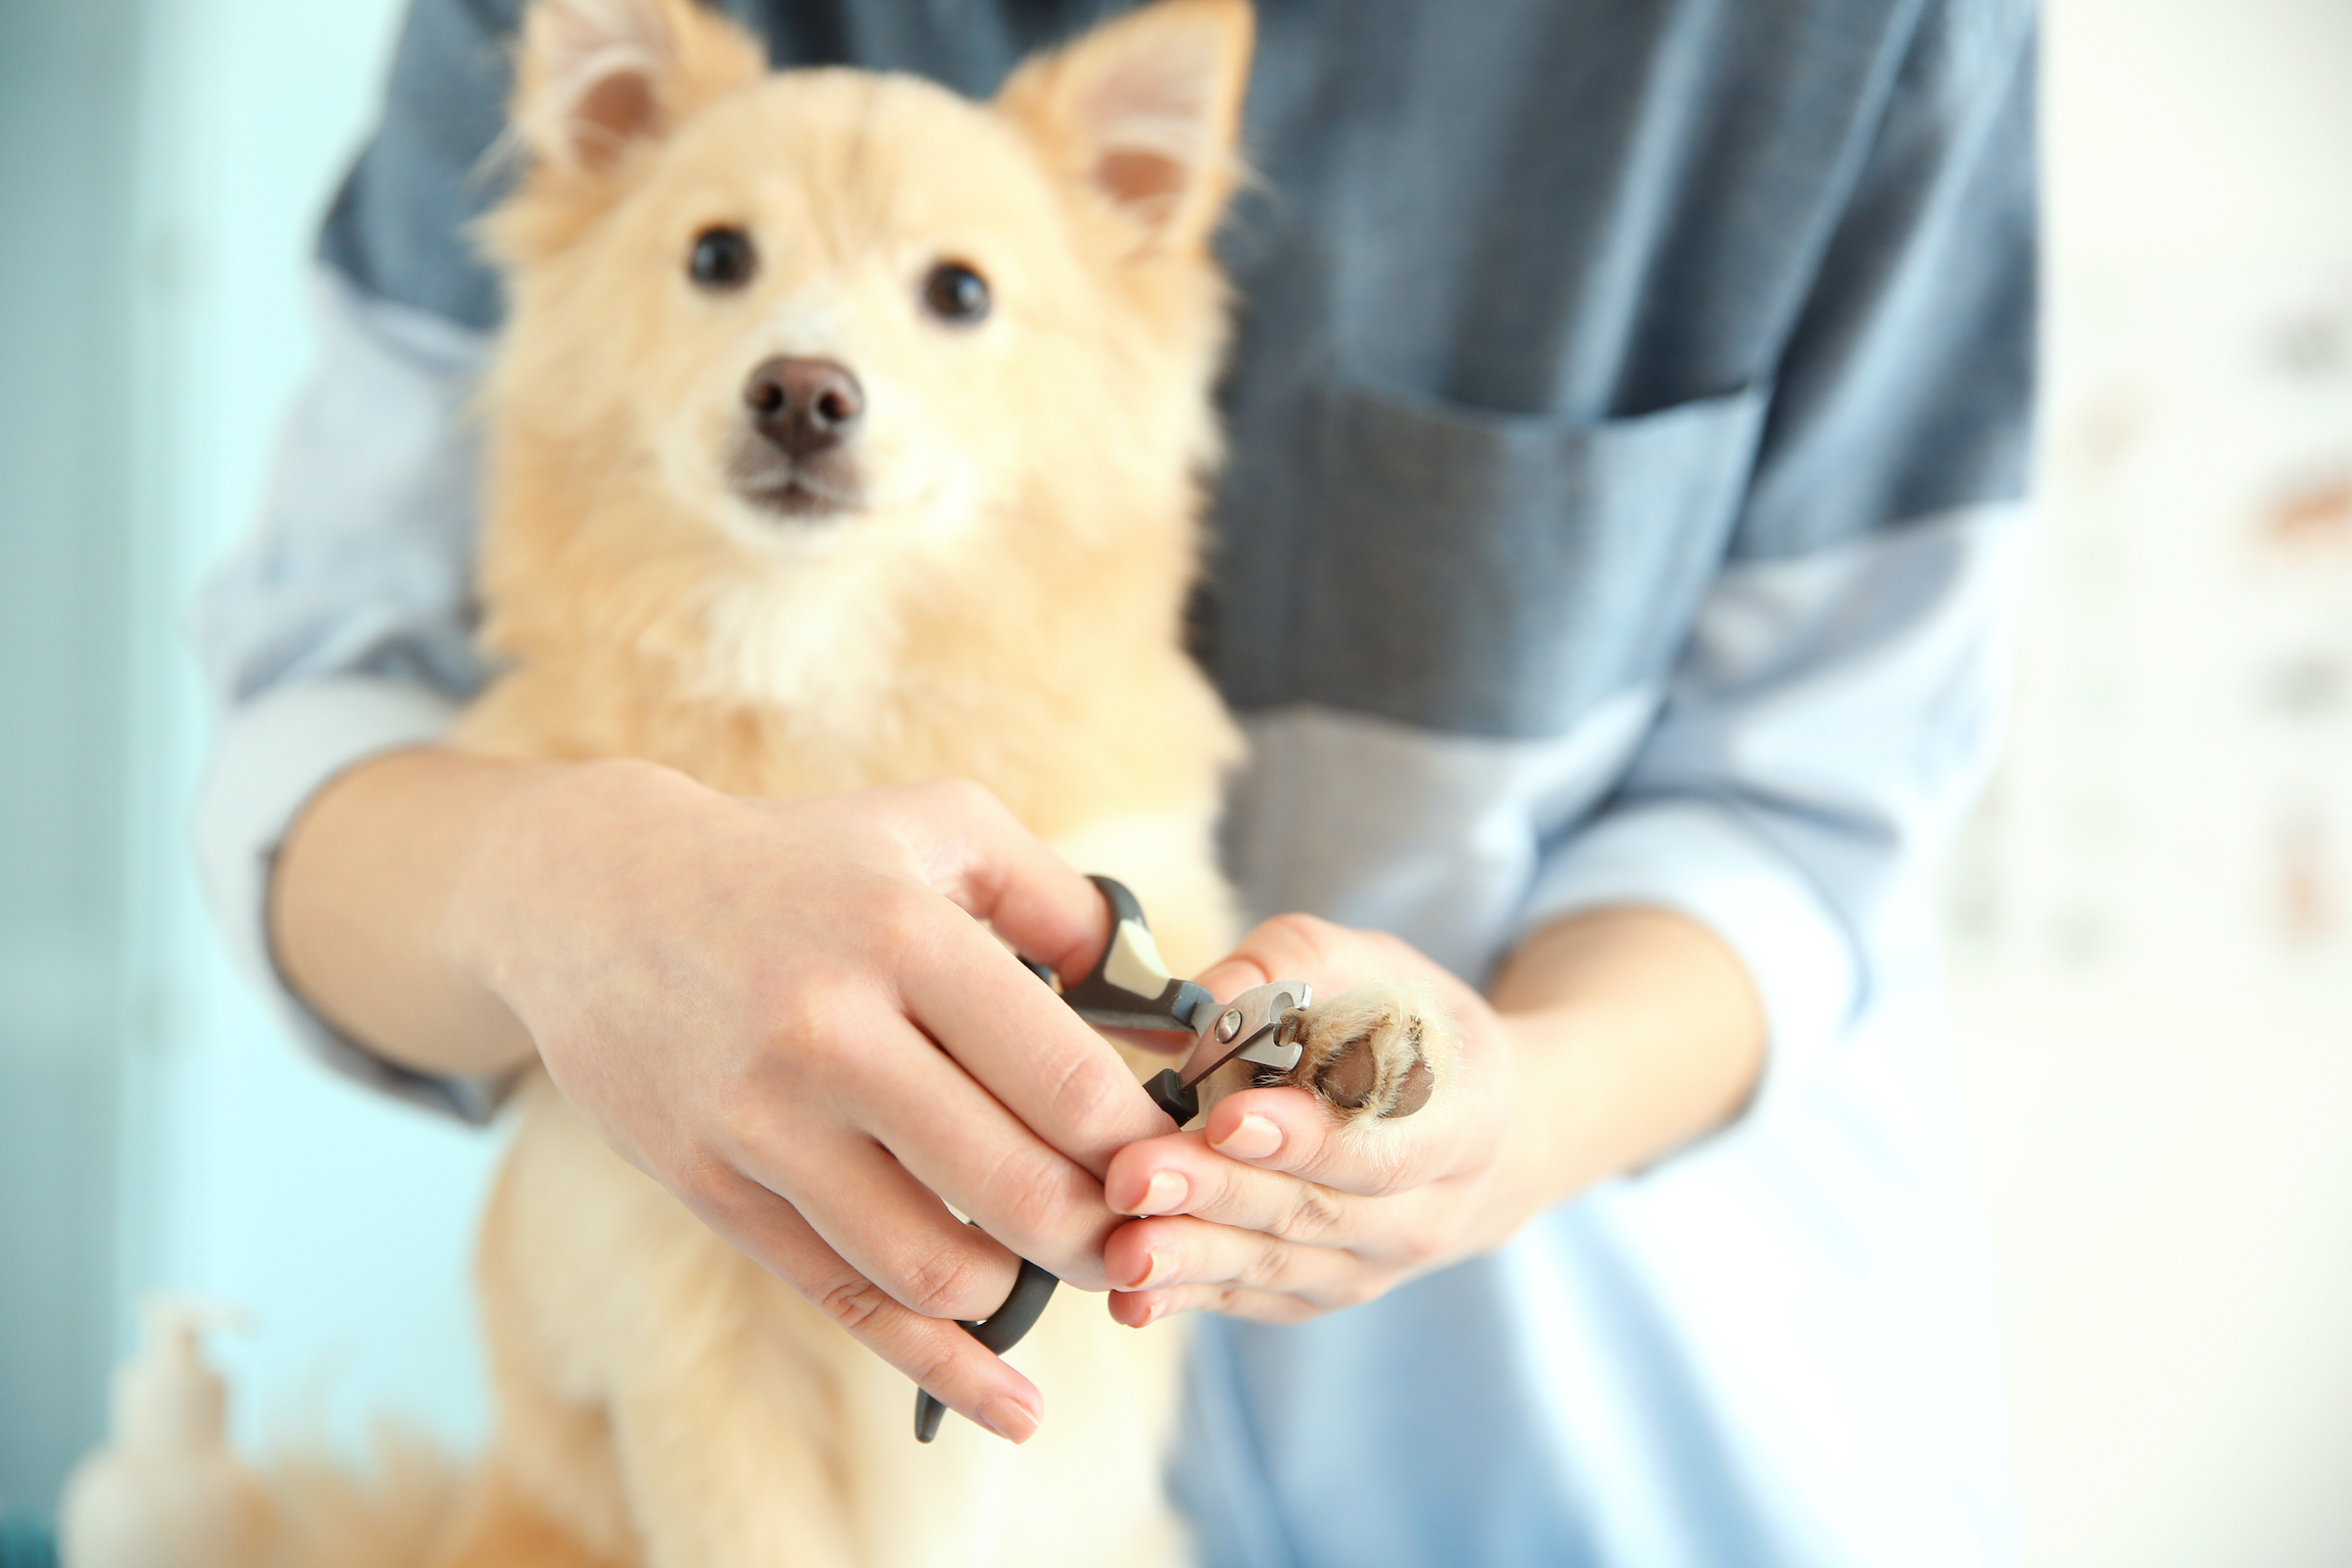 A small brown dog sits and looks at the camera while a person holds their paw and trims their nails